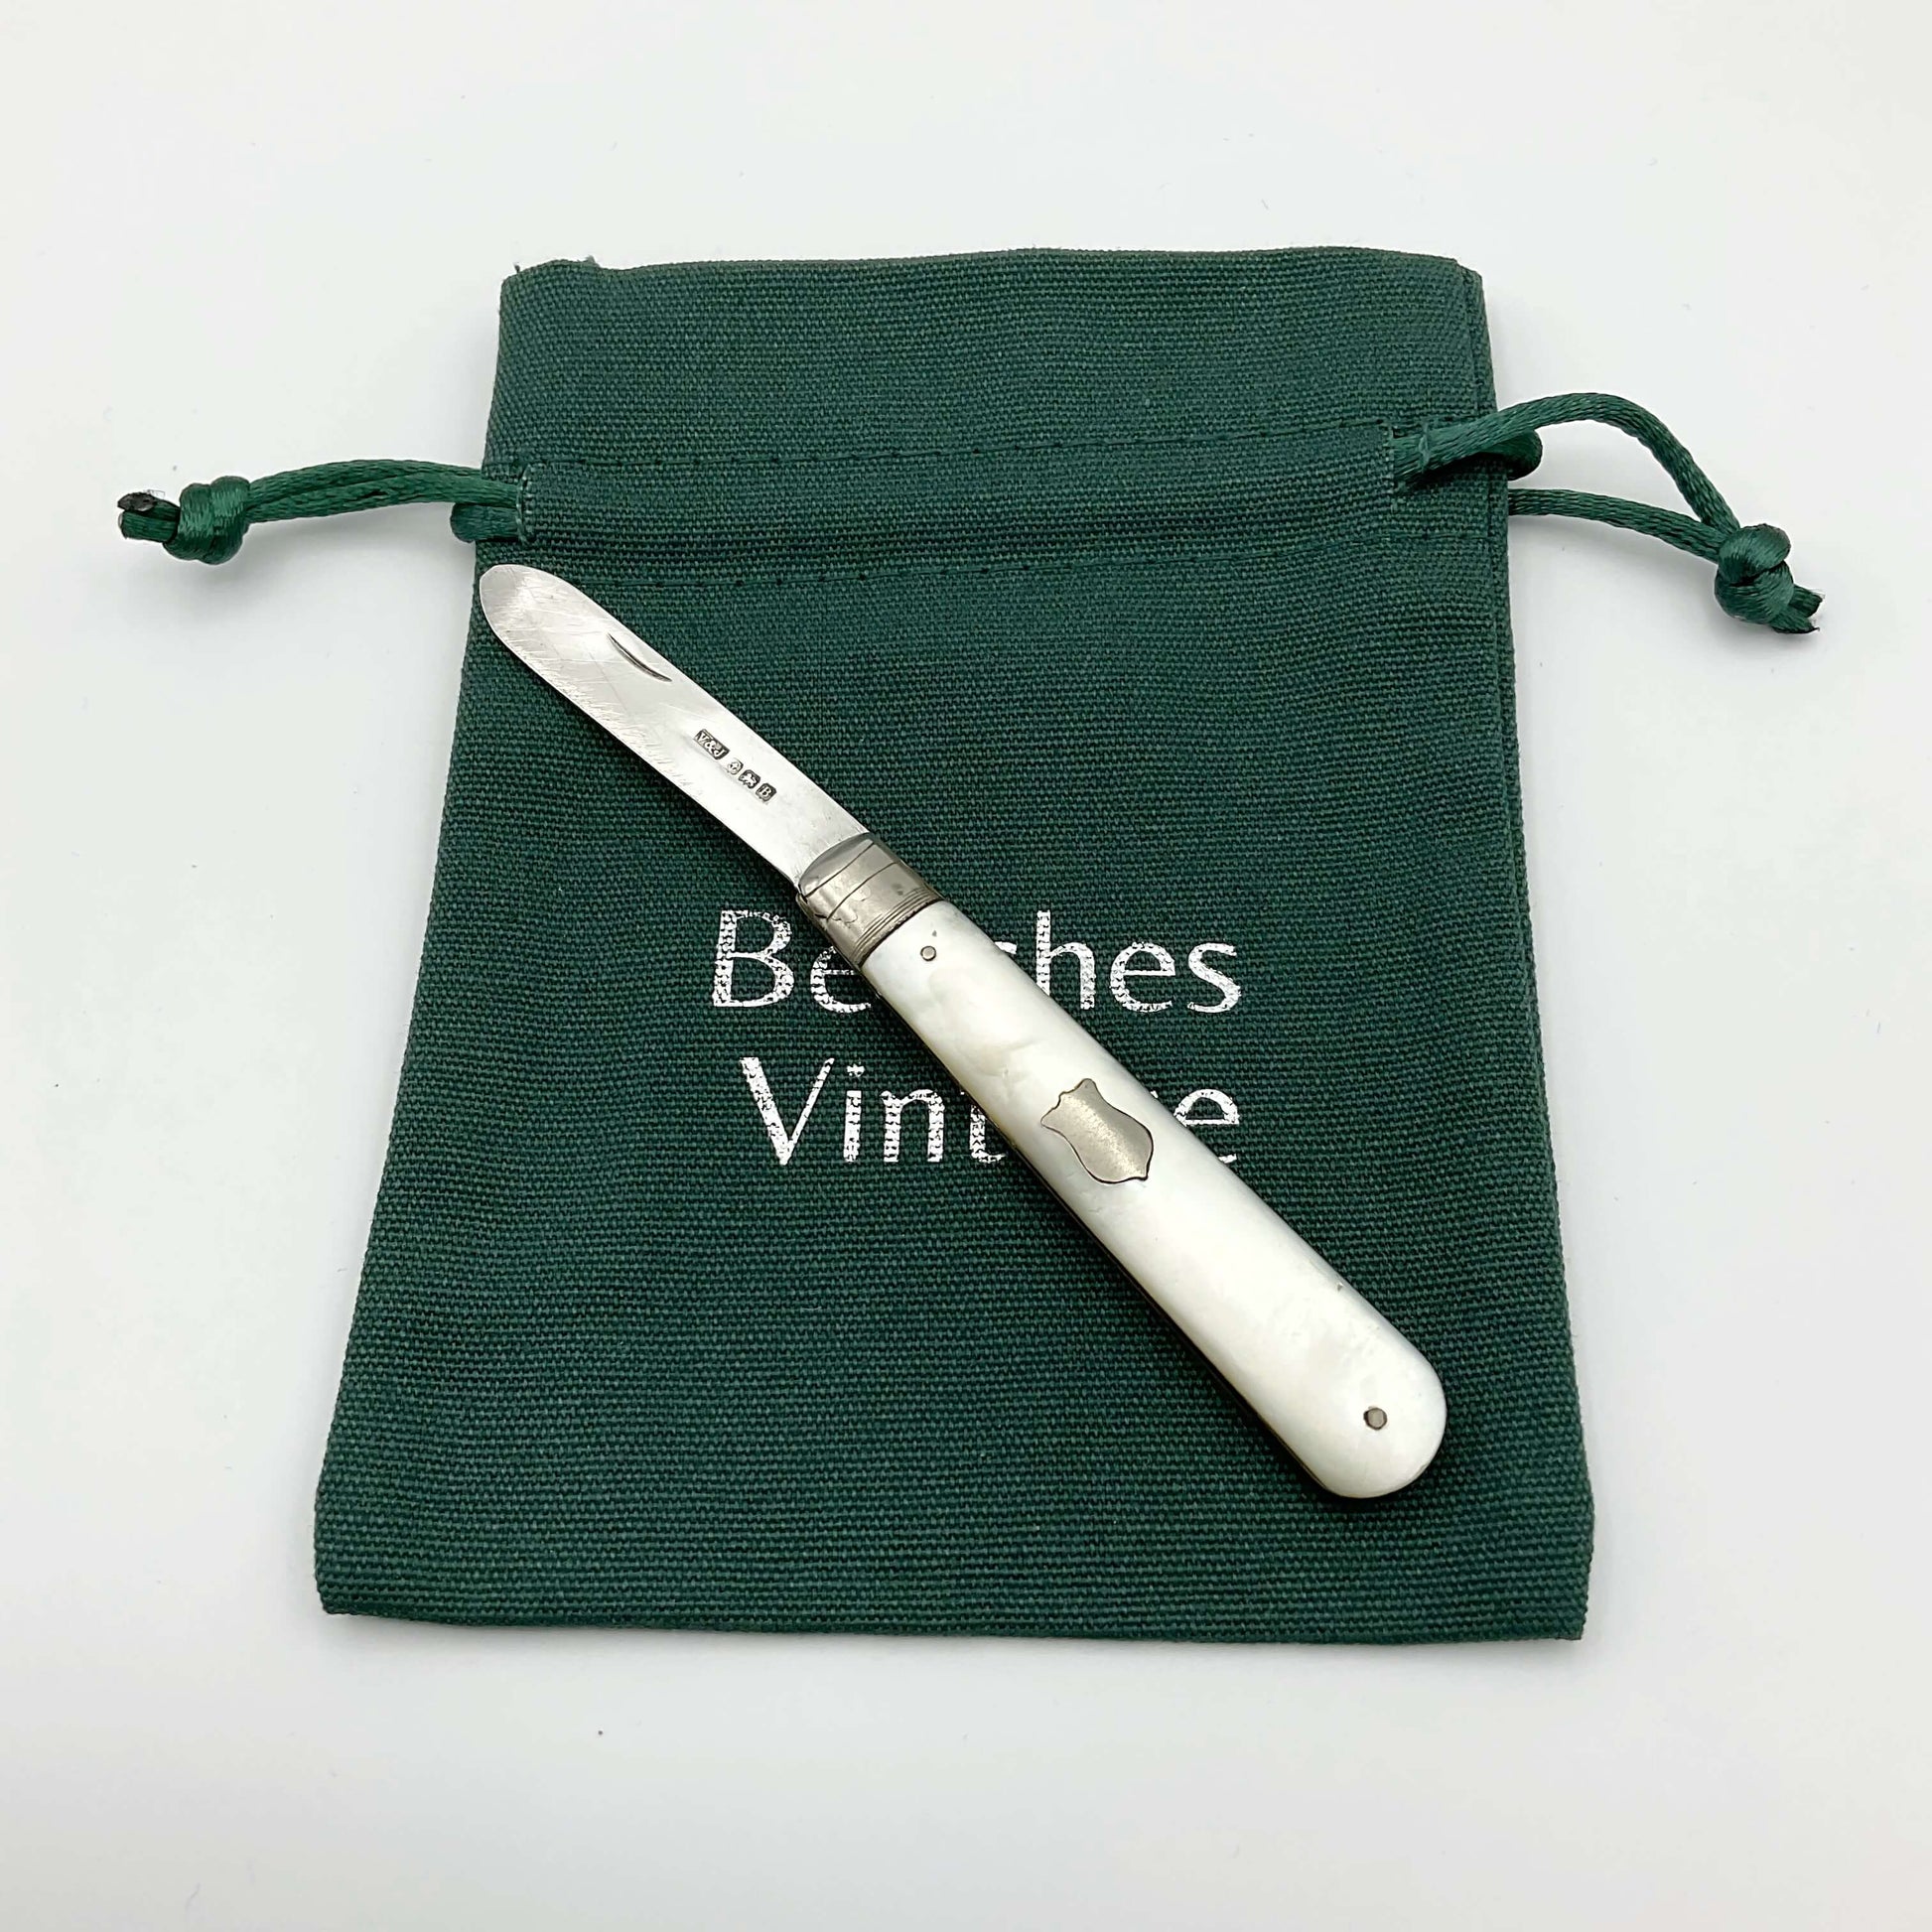 This is s folding fruit knife with a silver blade and a mother of pearl handle. It has a blank shield on one side of the handle. It's on a gift bag